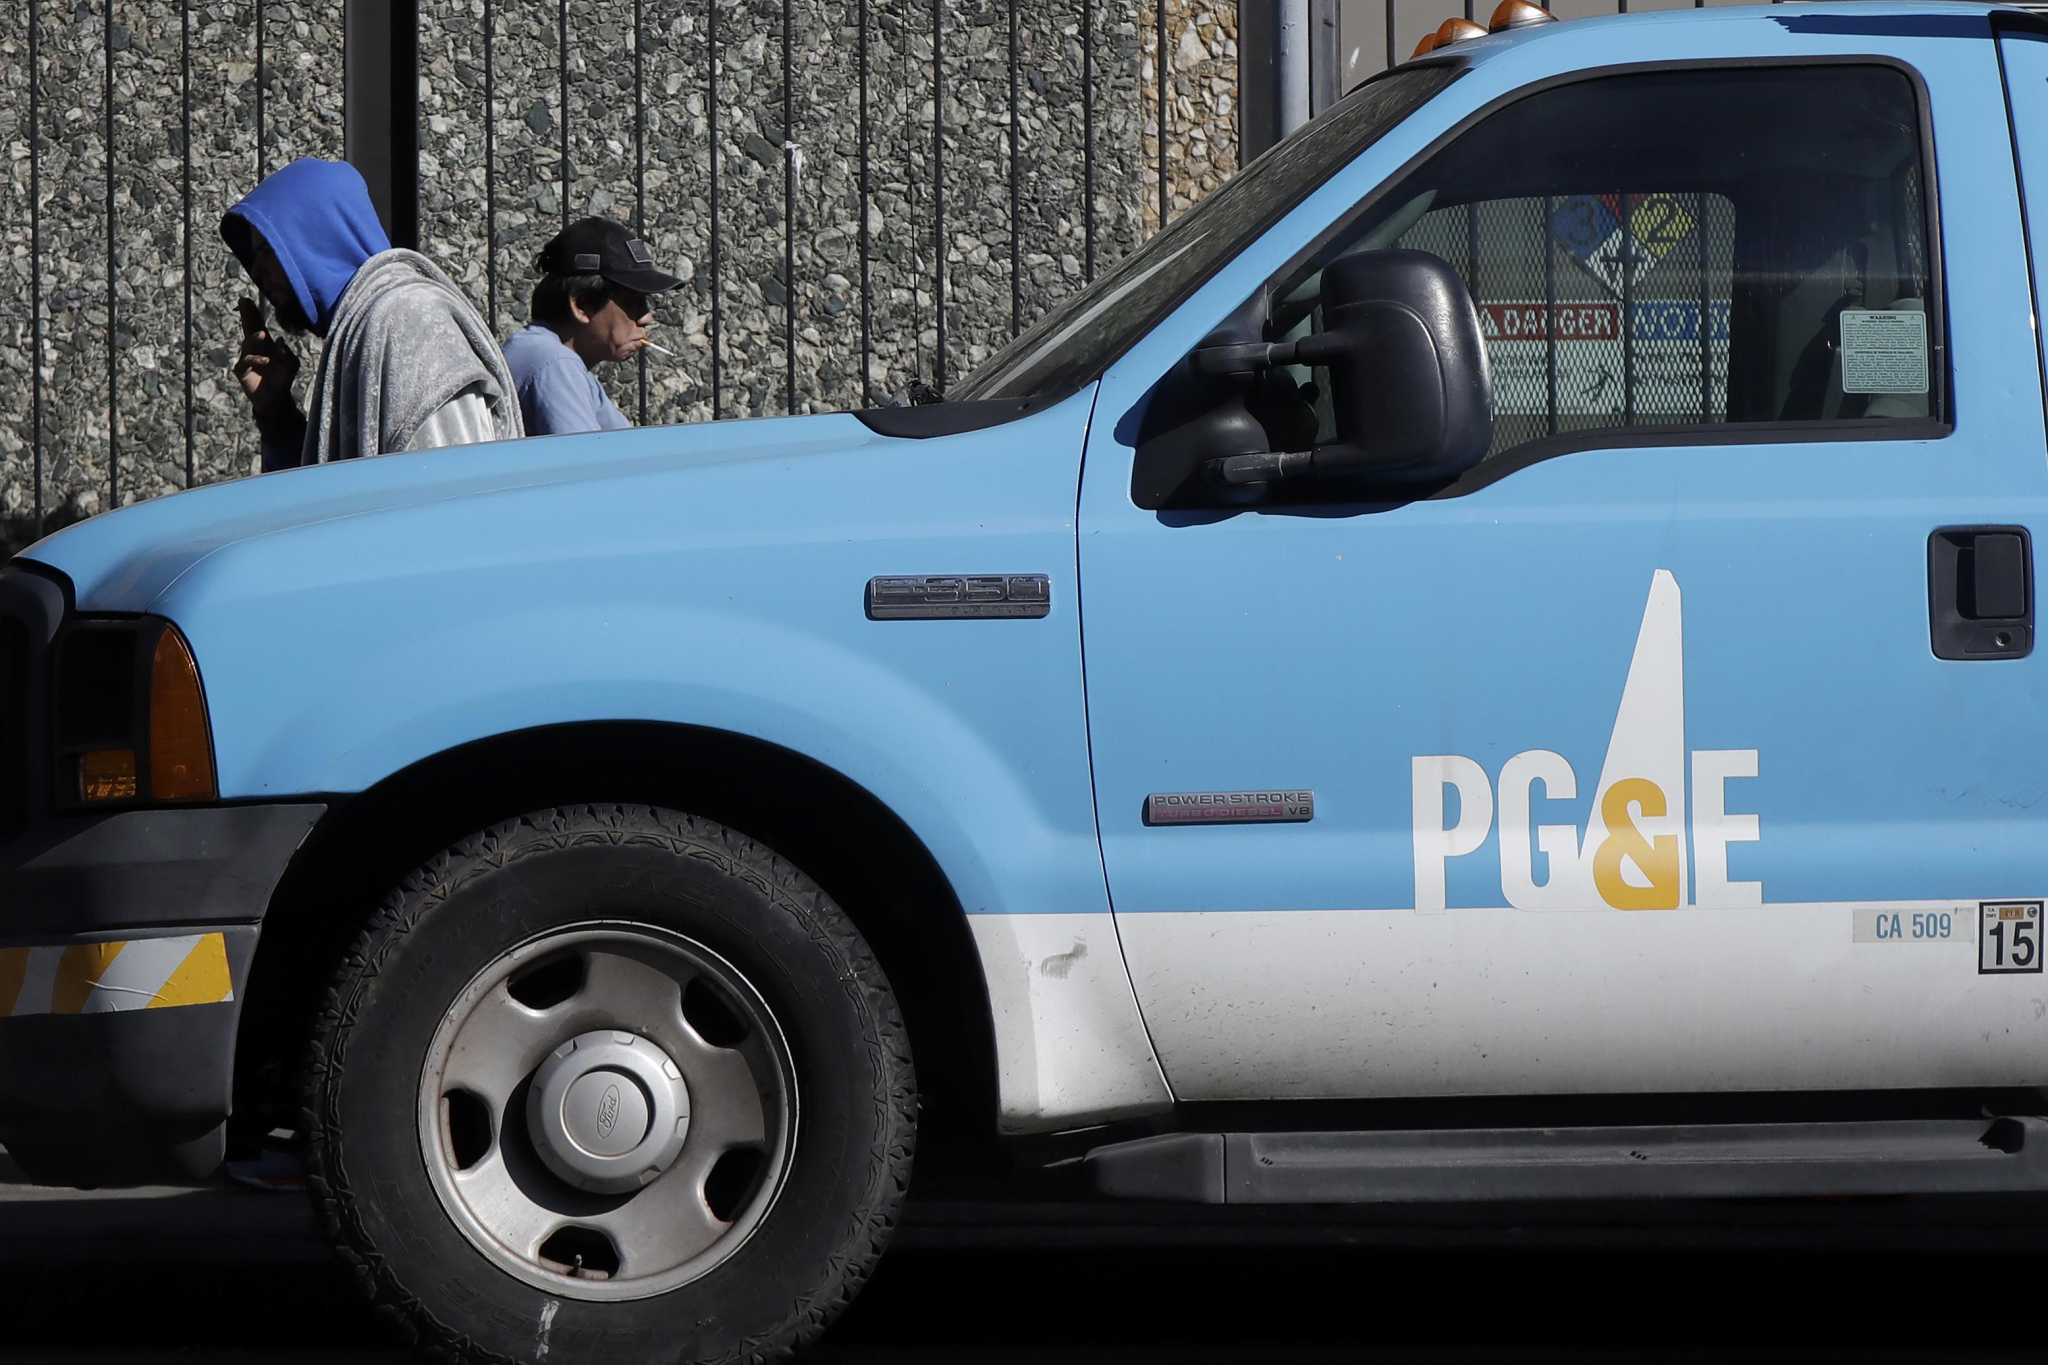 Two PG&E employees robbed in the Oakland hills, police say